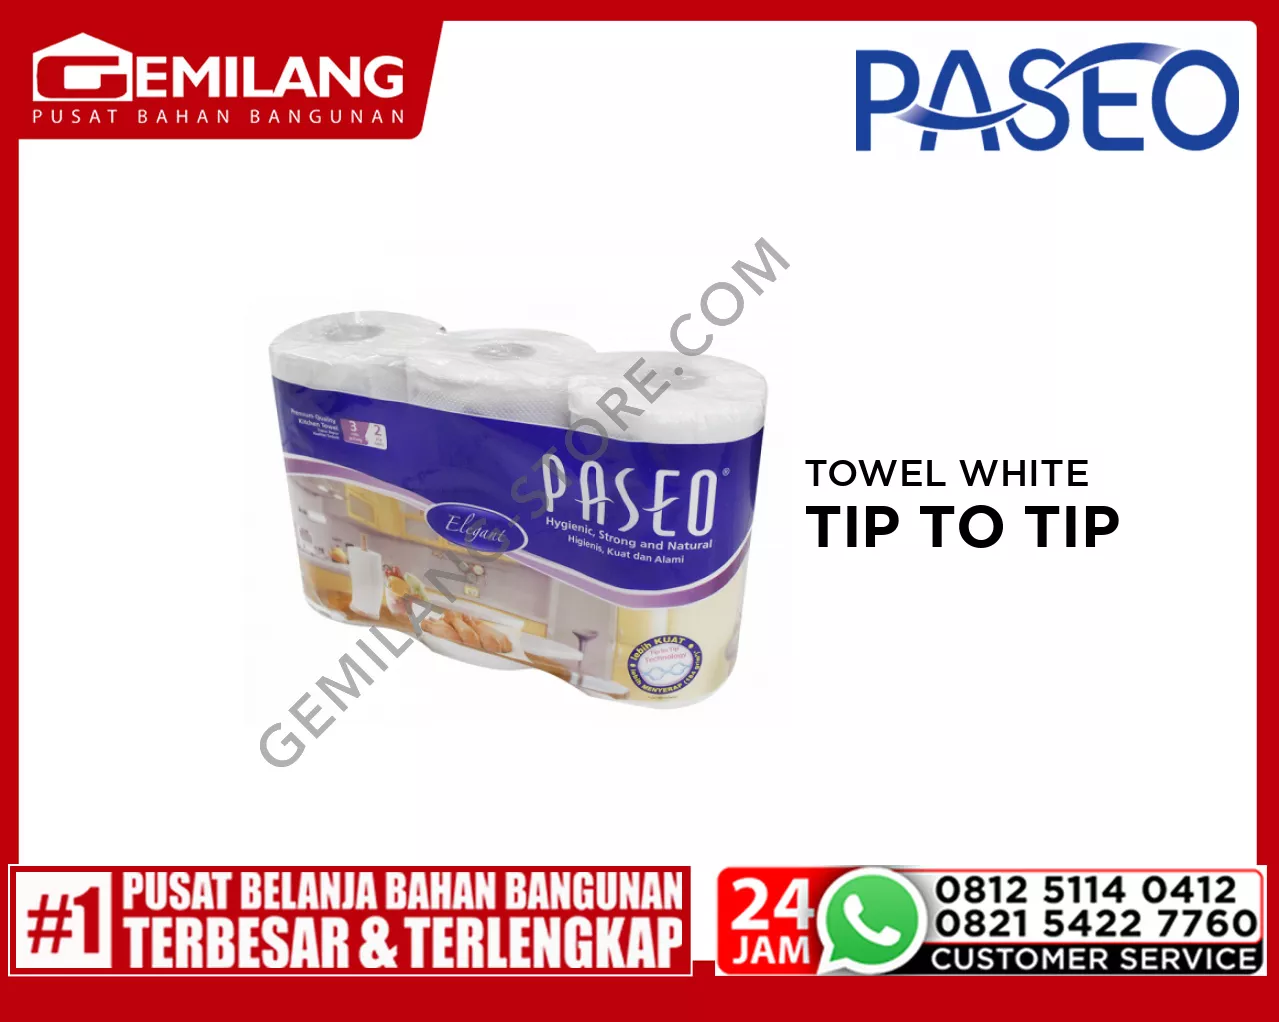 PASEO TOWEL WHITE TIP TO TIP